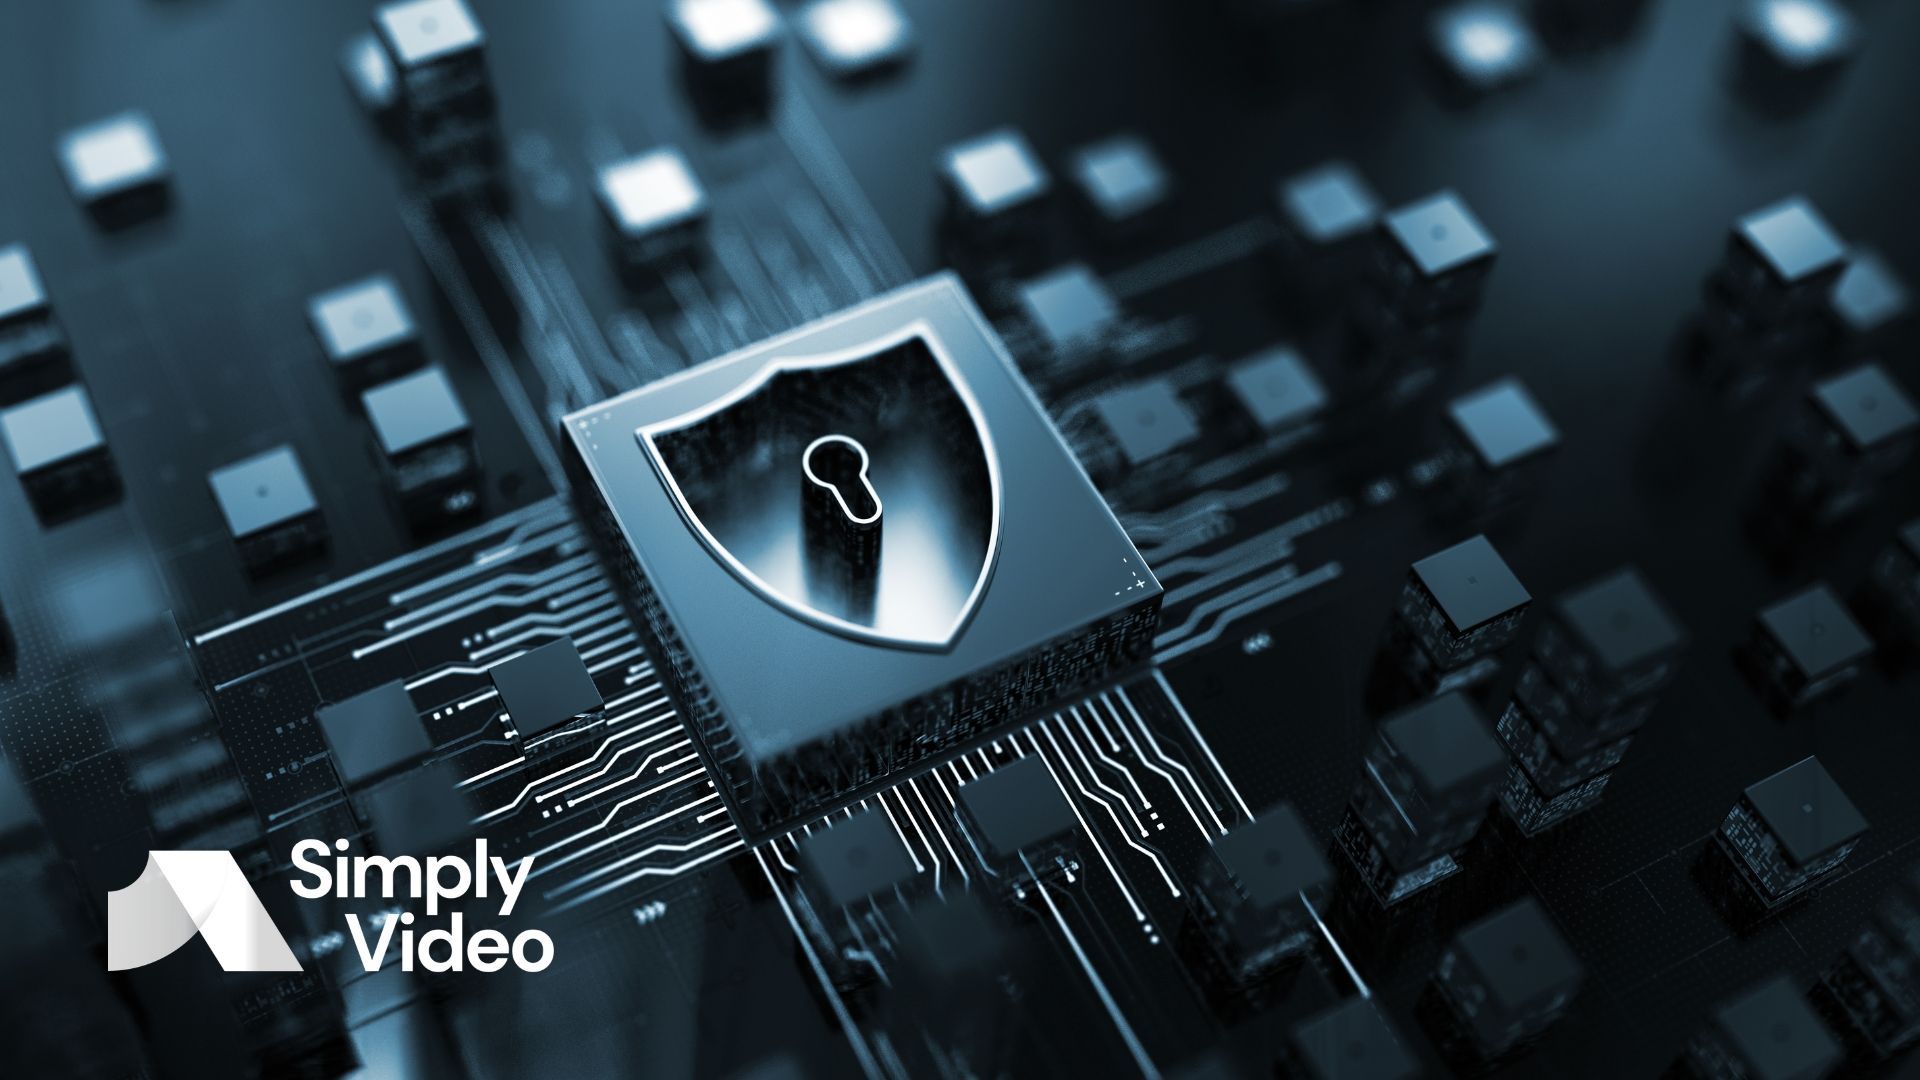 Security is important in every industry – but some critical meetings require additional support. Learn how SimplyVideo is a highly secure XR video solution.
